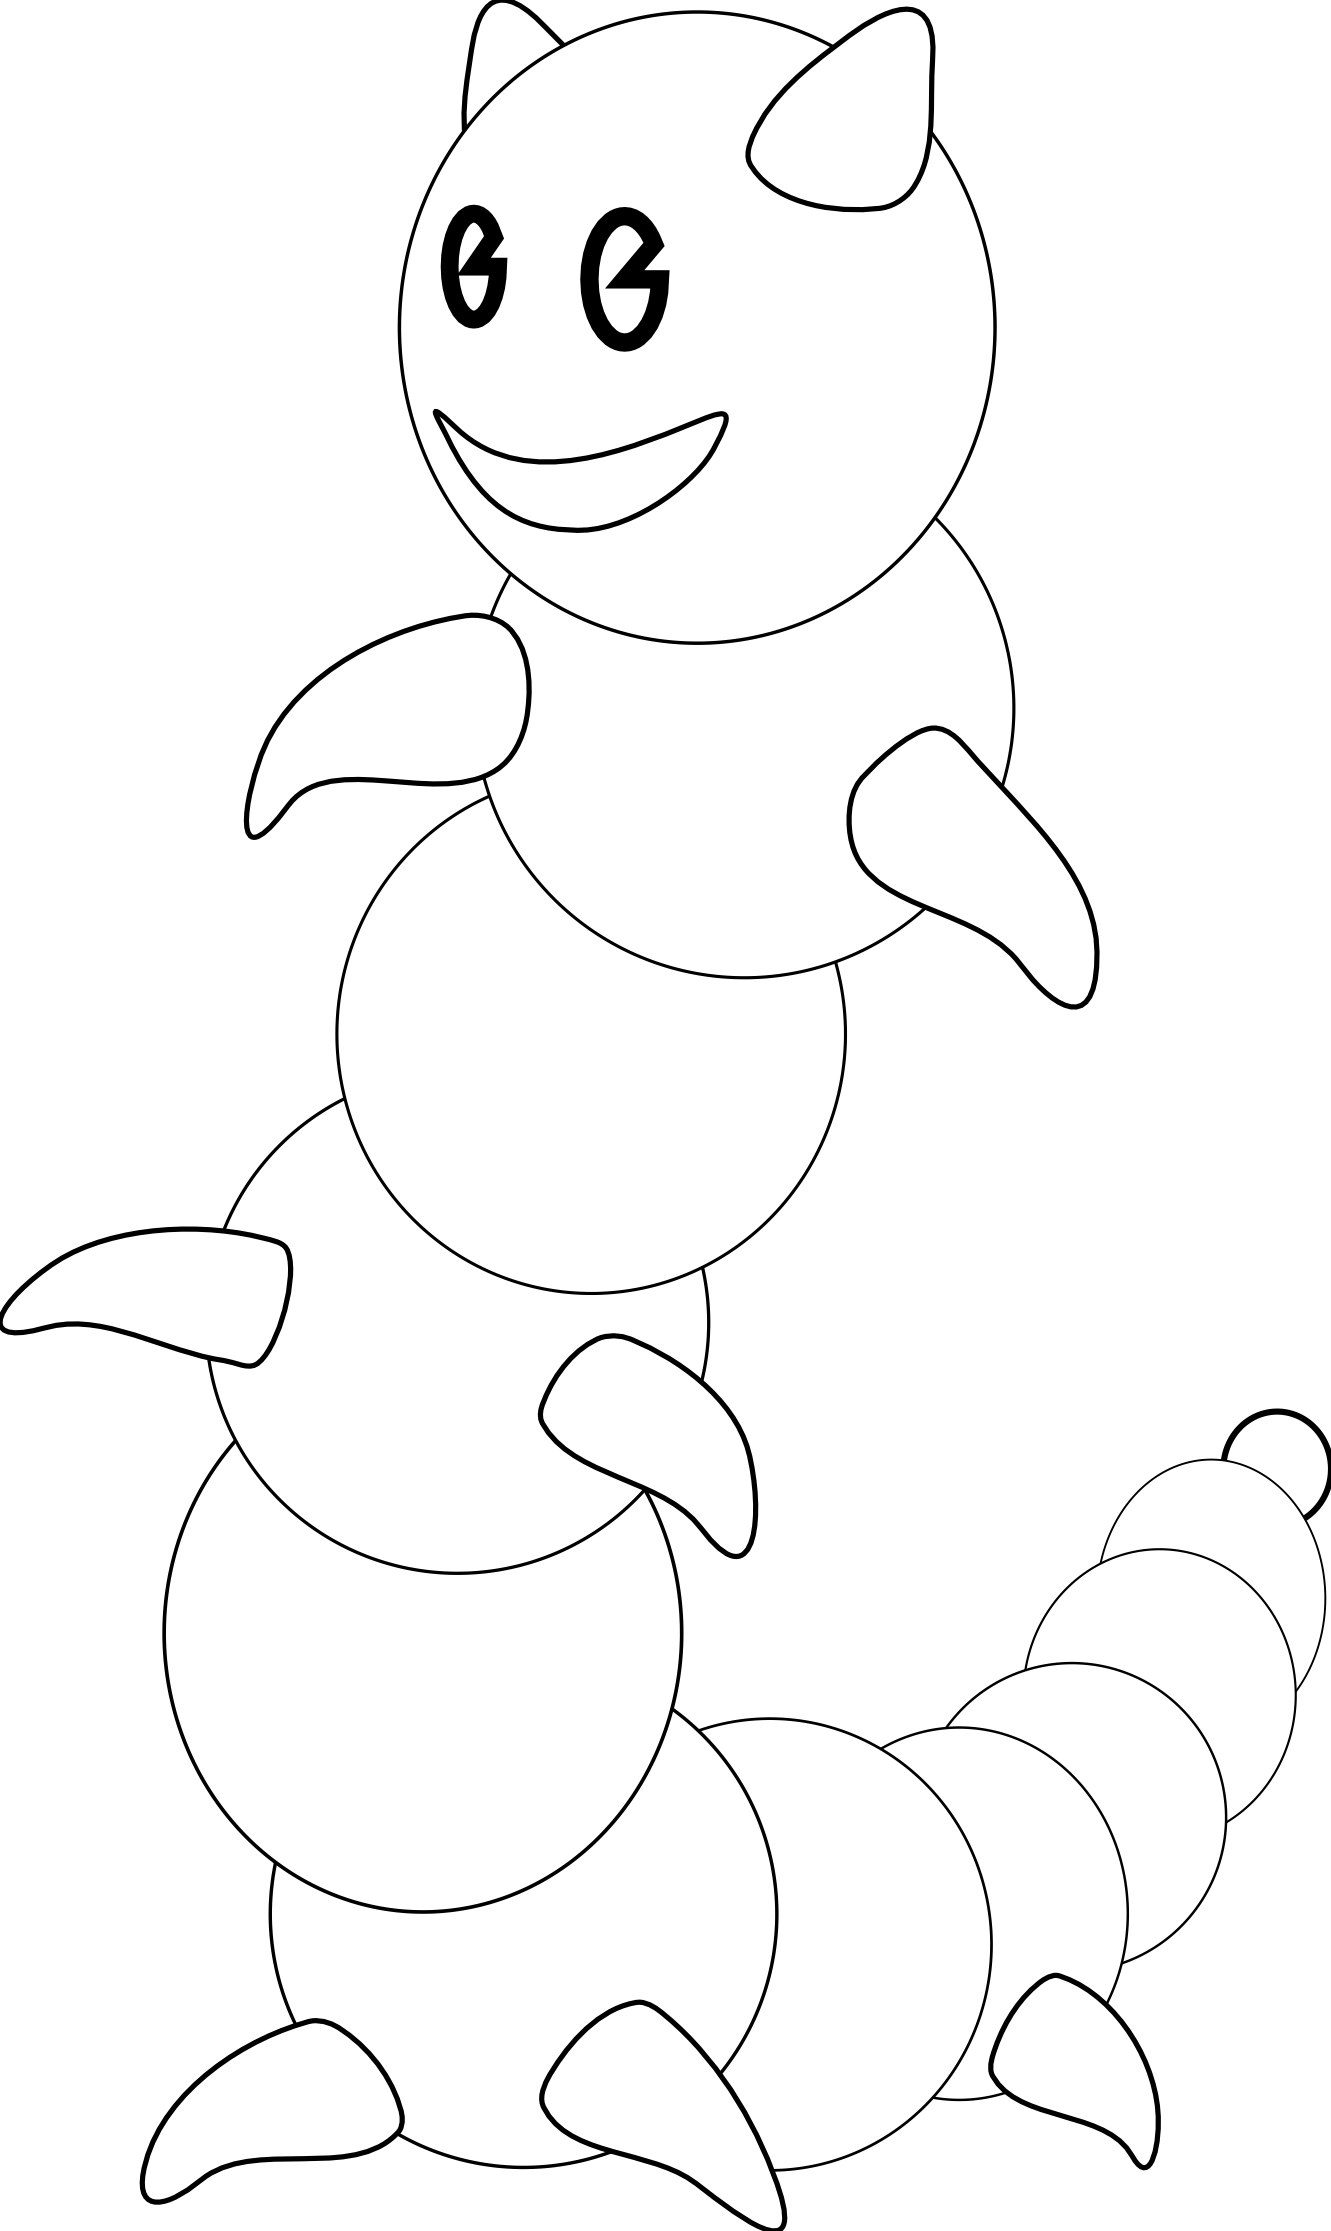 Black and white panda. Worm clipart book reading caterpillar